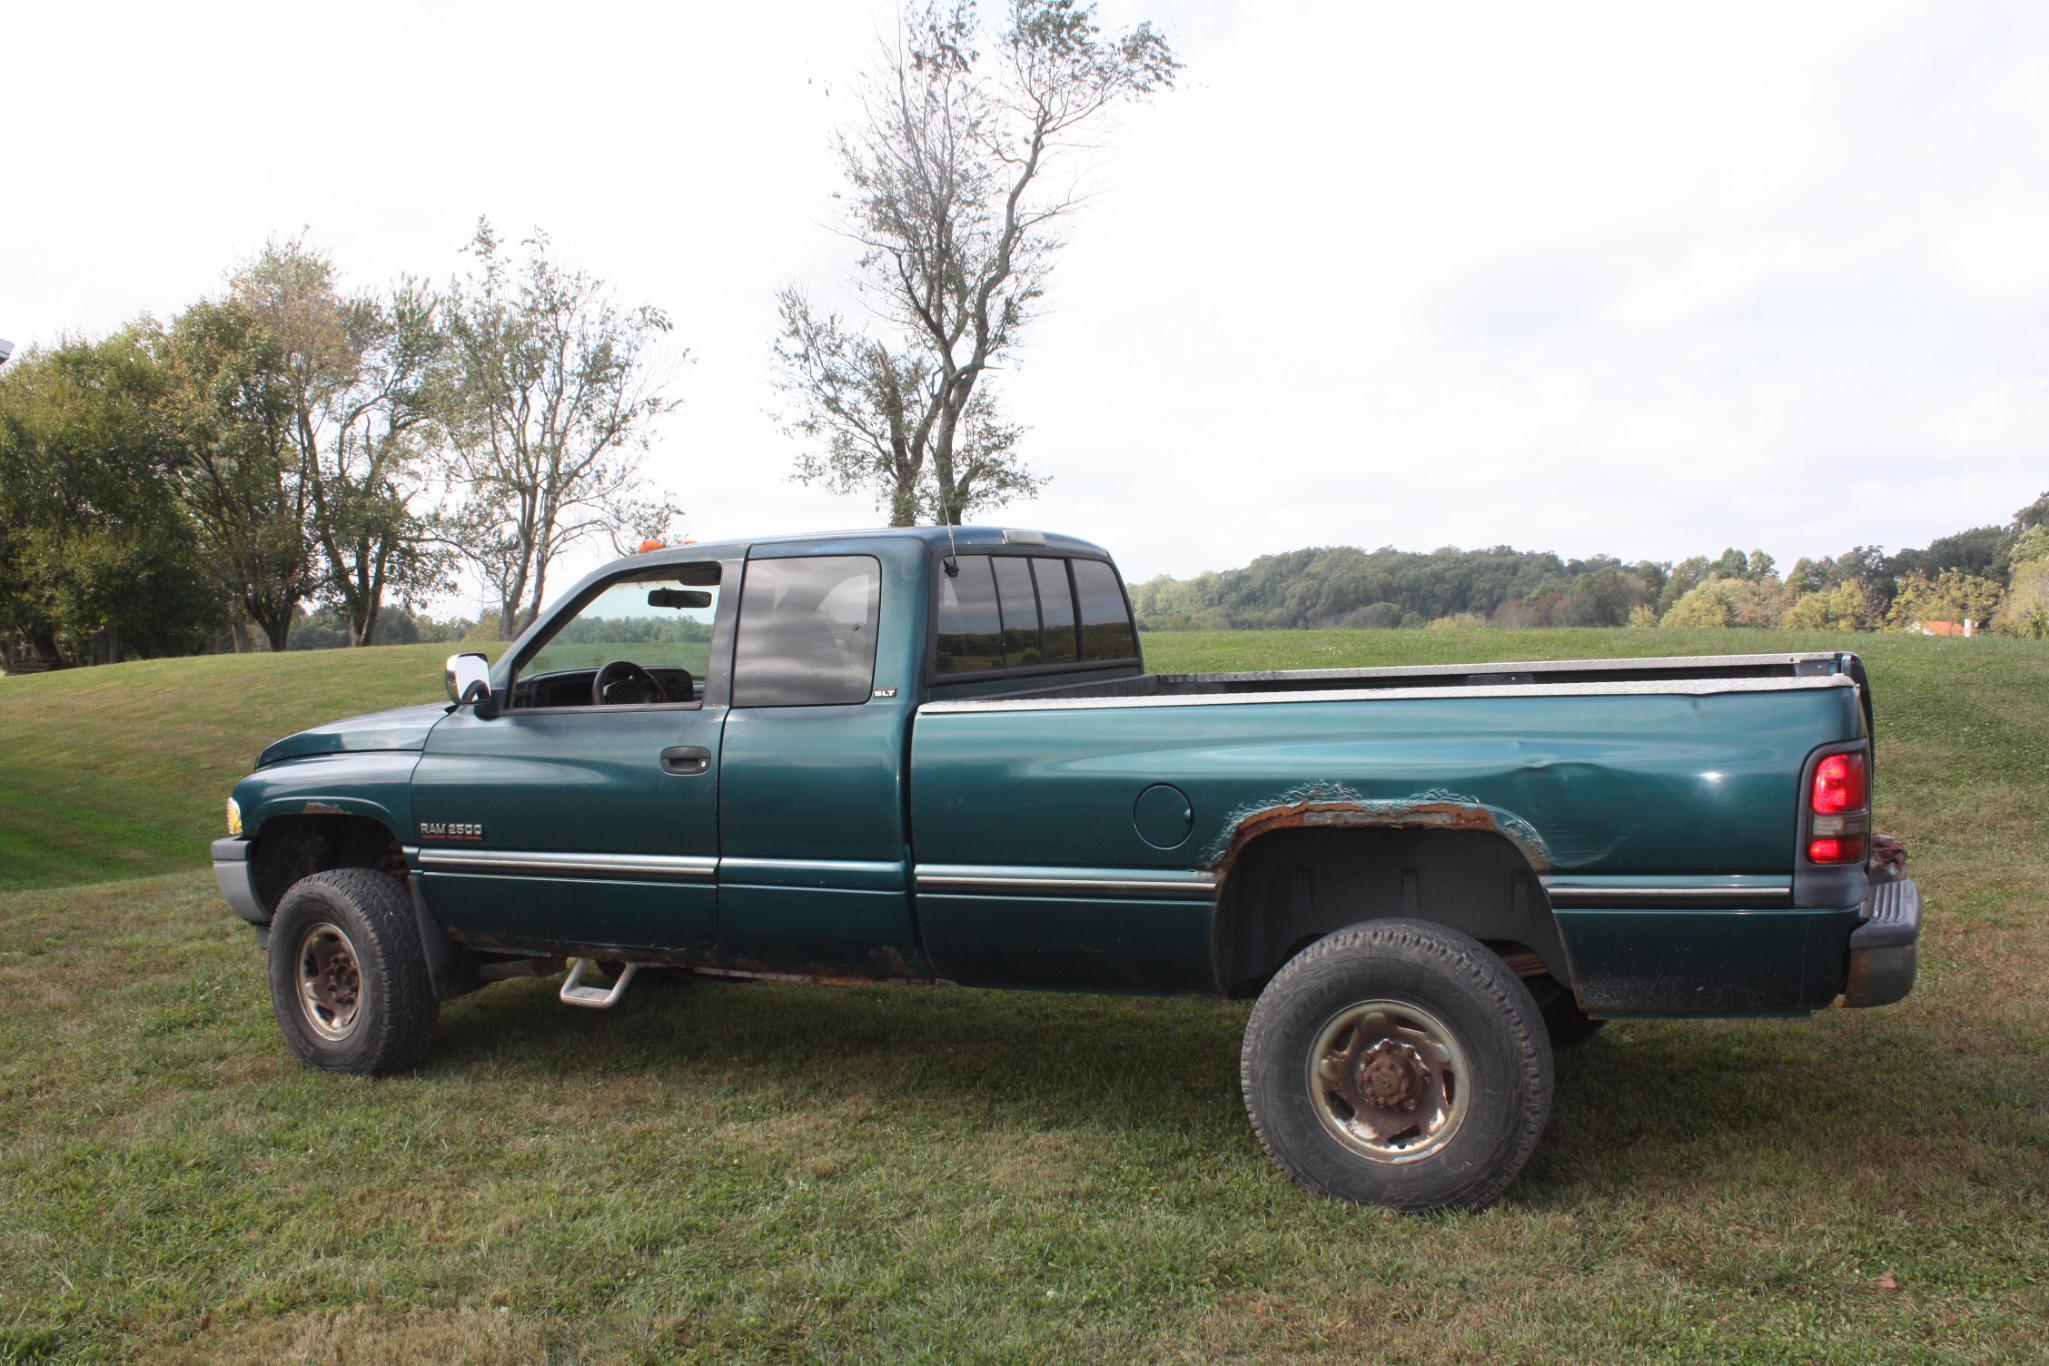 1999 Dodge extended cab, 250 Diesel 4X4 auto, rusty but runs and drives.